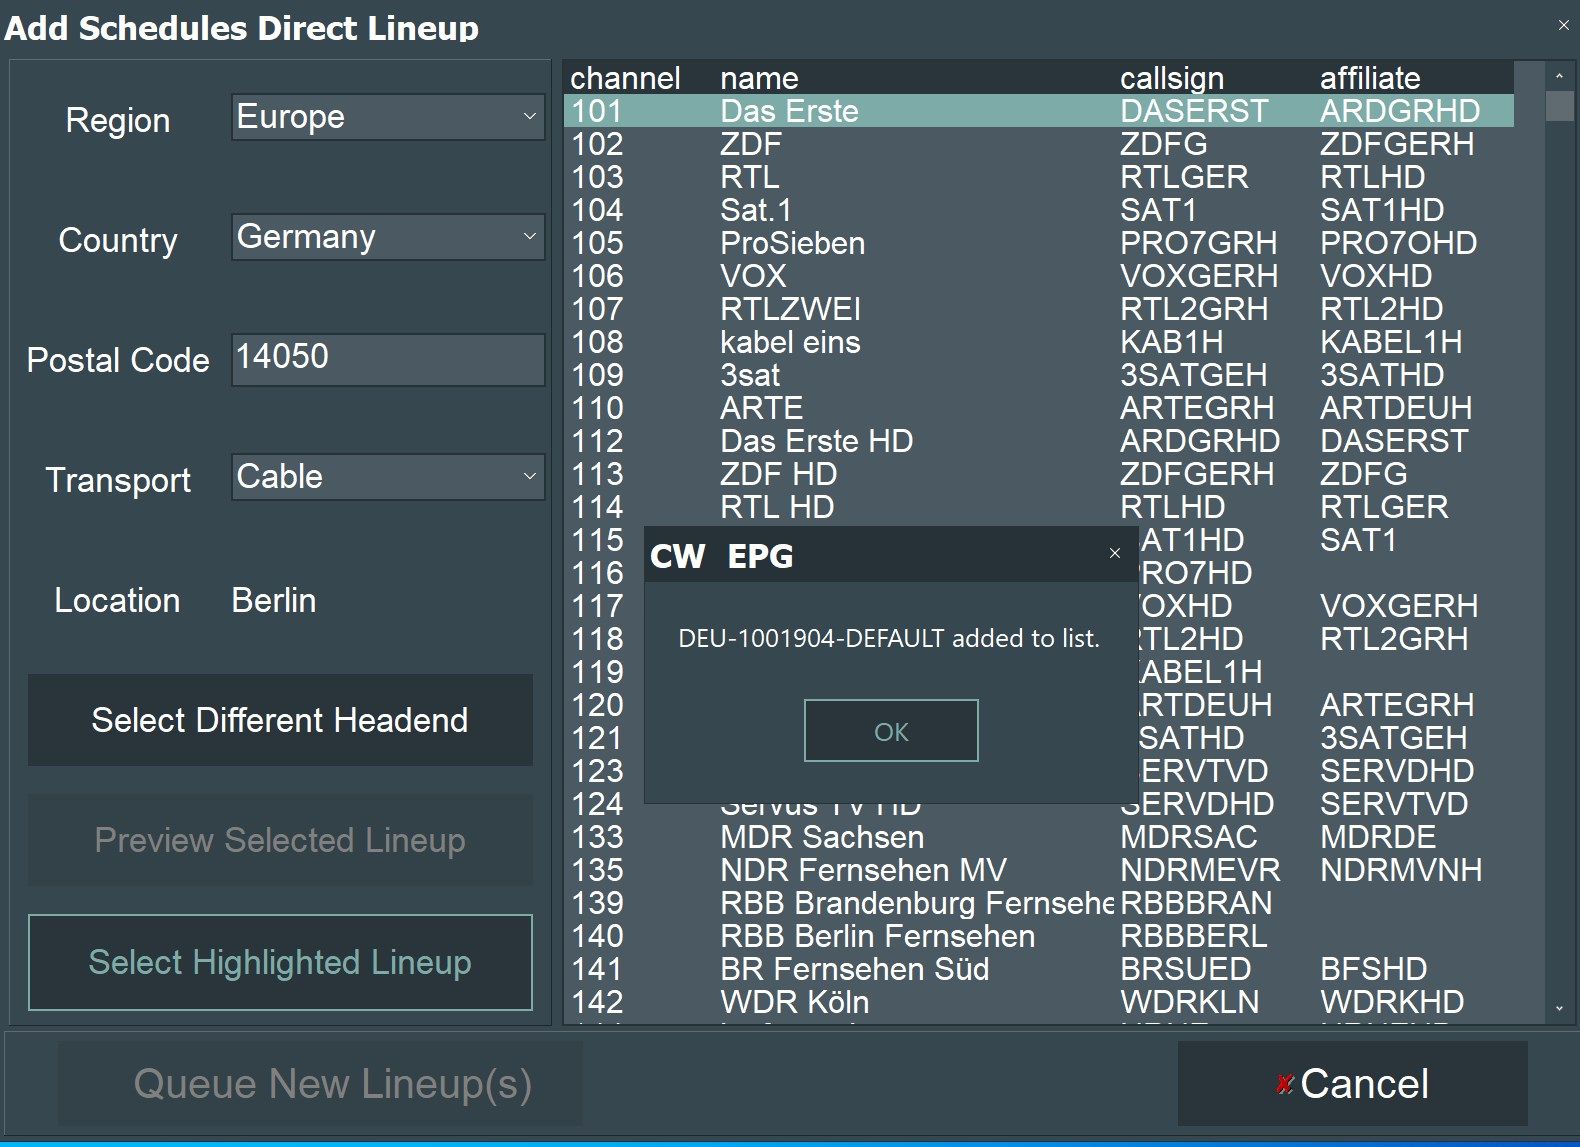 Example of Schedules Direct lineup selection menu